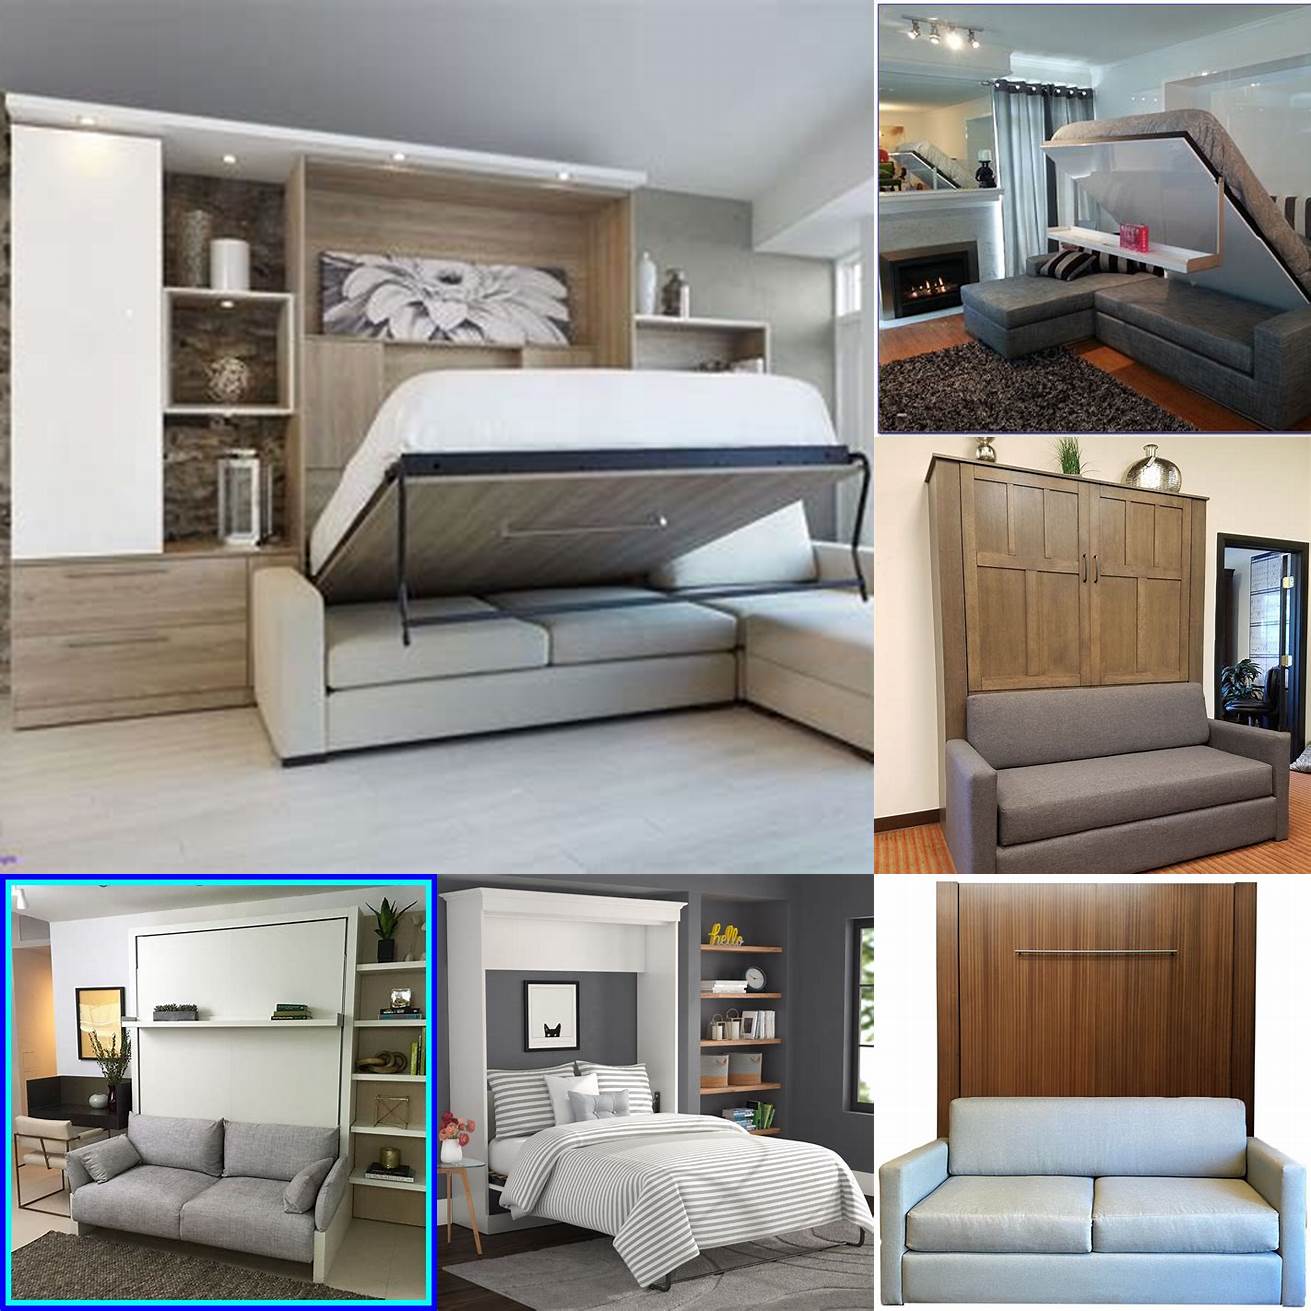 A Murphy bed with couch is a great option for basement apartments